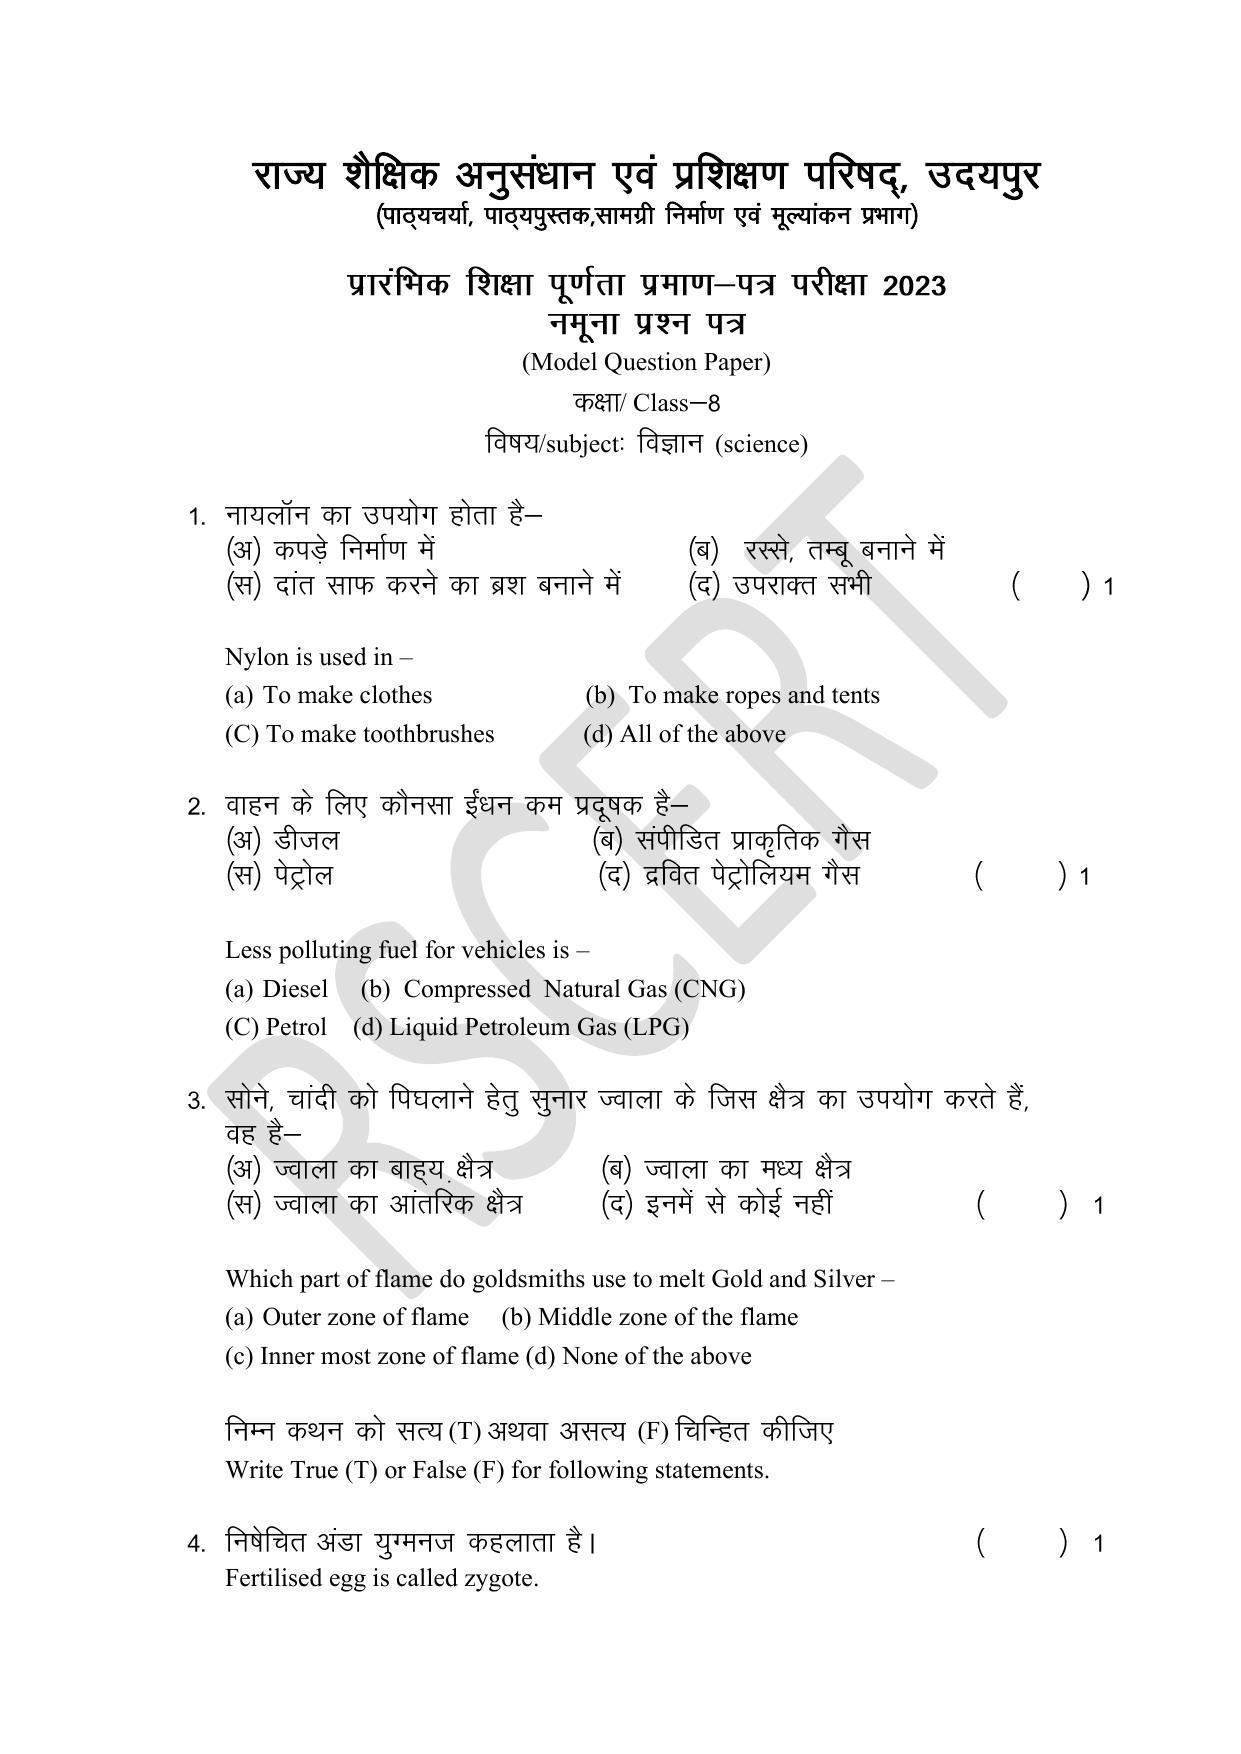 RBSE Class 8 Math & Science Sample Paper 2023 - Page 12